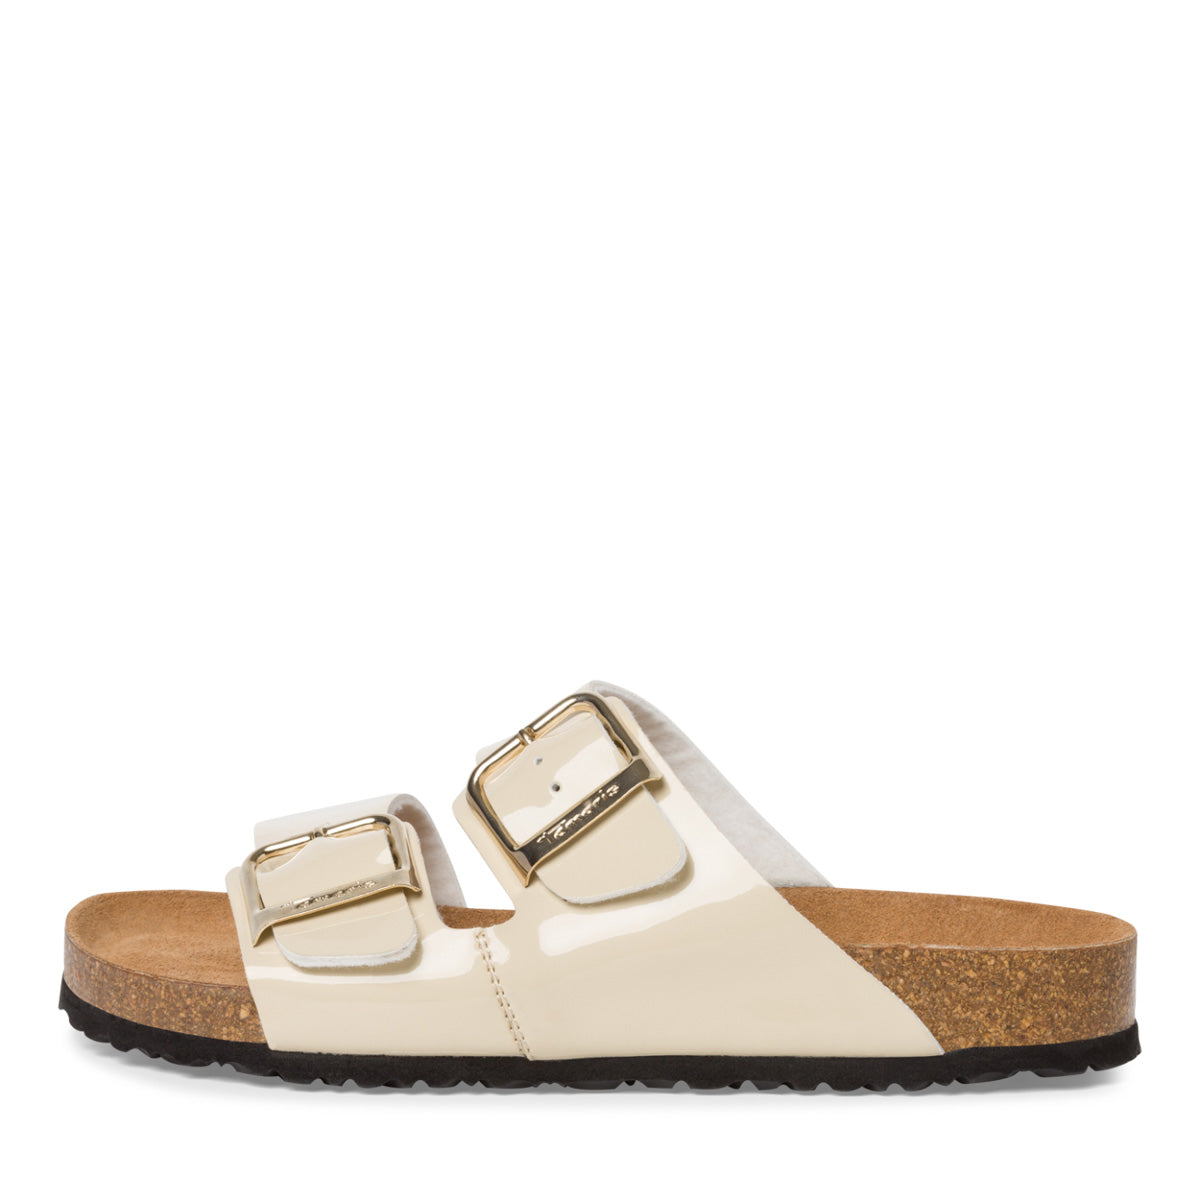 Minimalist Two-Strap Slide Sandals in Nude Patent